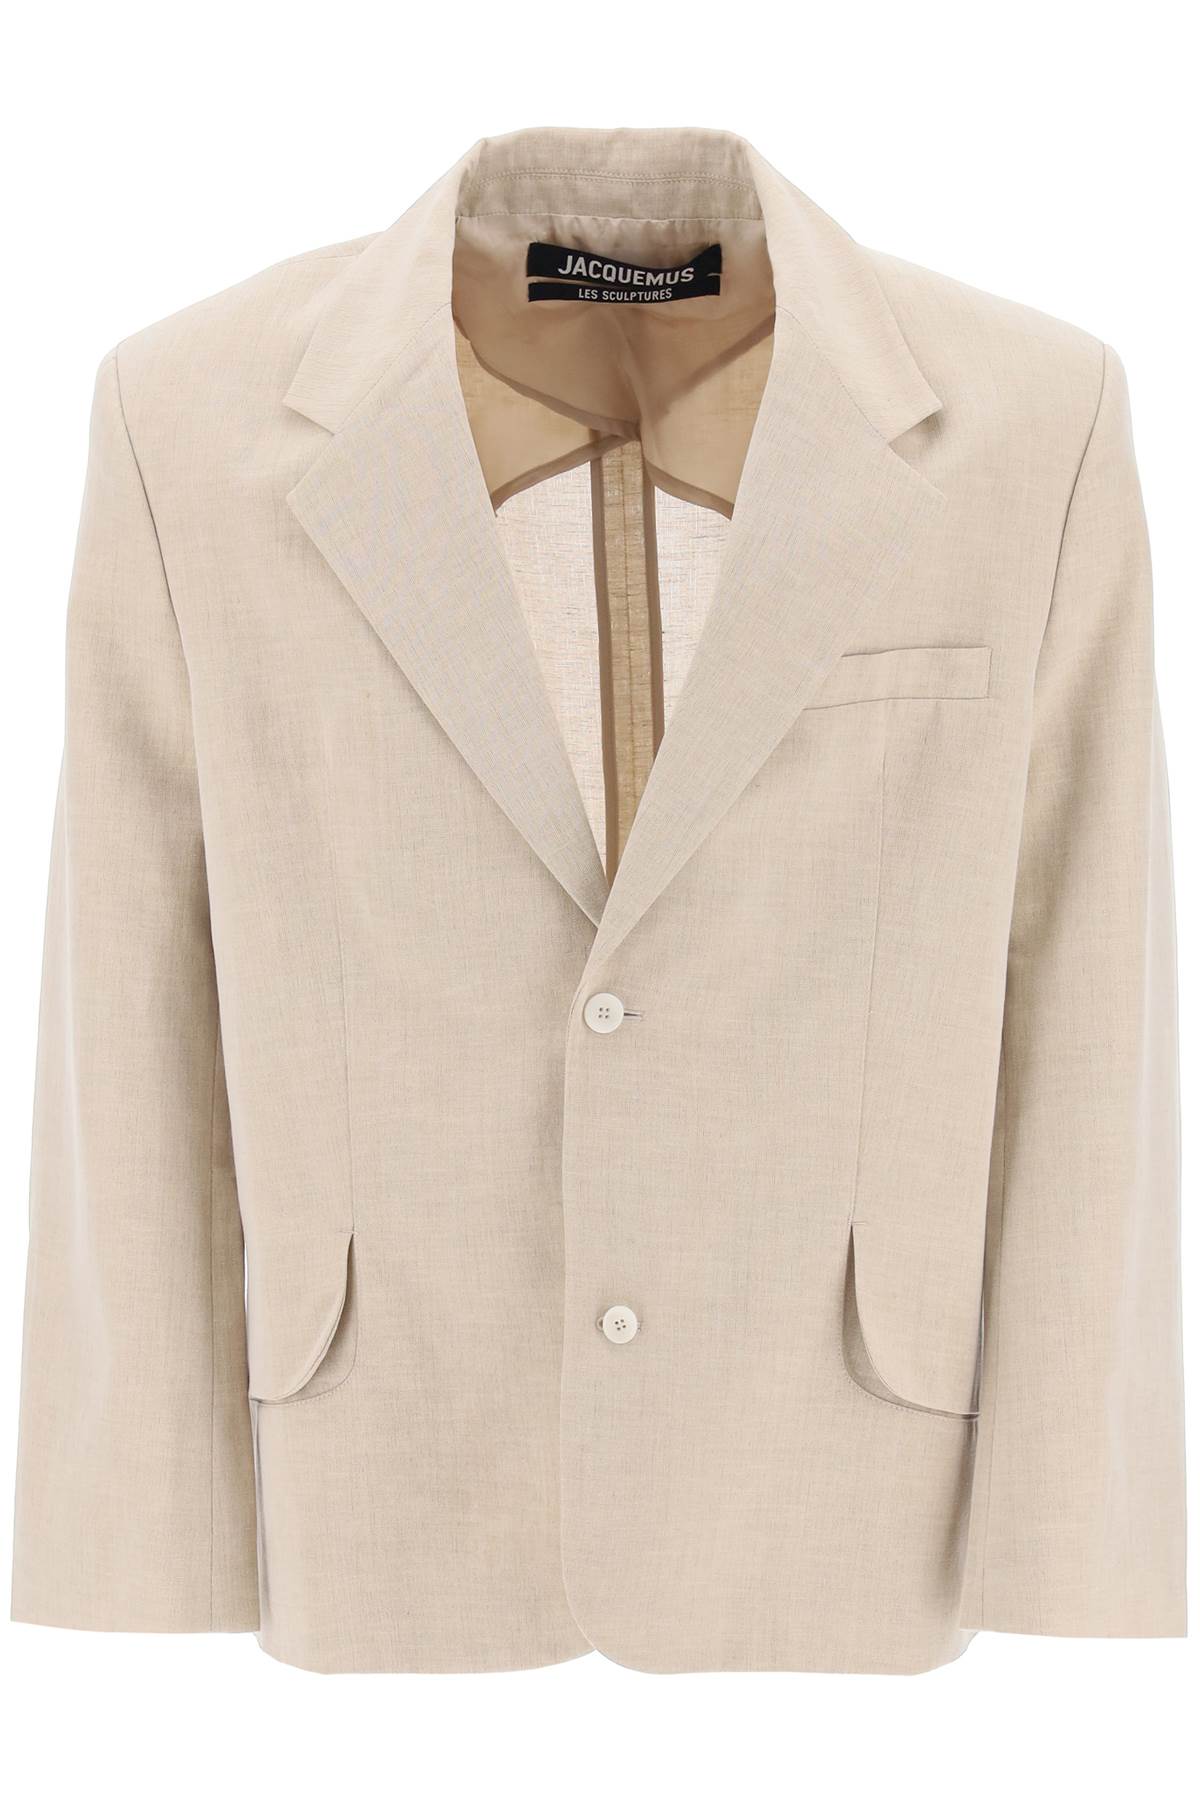 JACQUEMUS Men's Beige Single-Breasted Jacket for SS24 Season